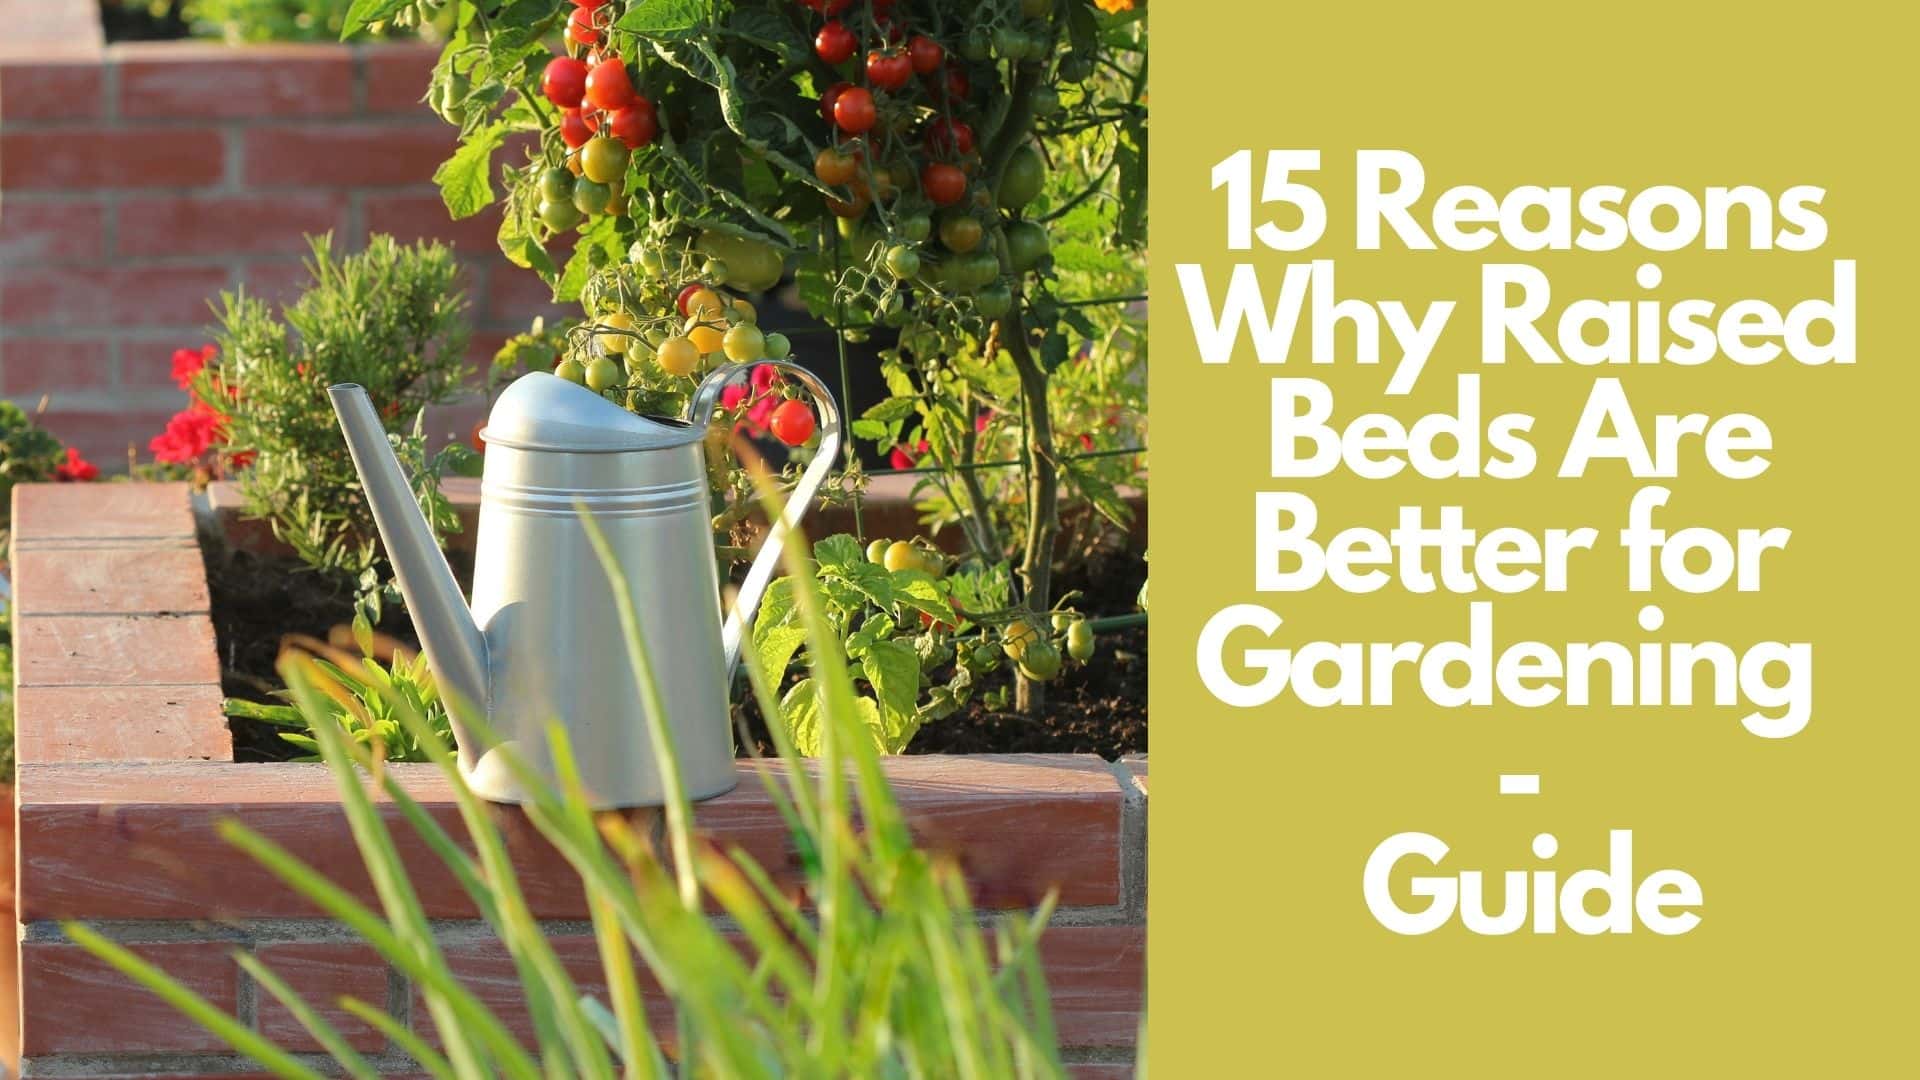 15 Reasons Why Raised Beds Are Better for Gardening | Guide